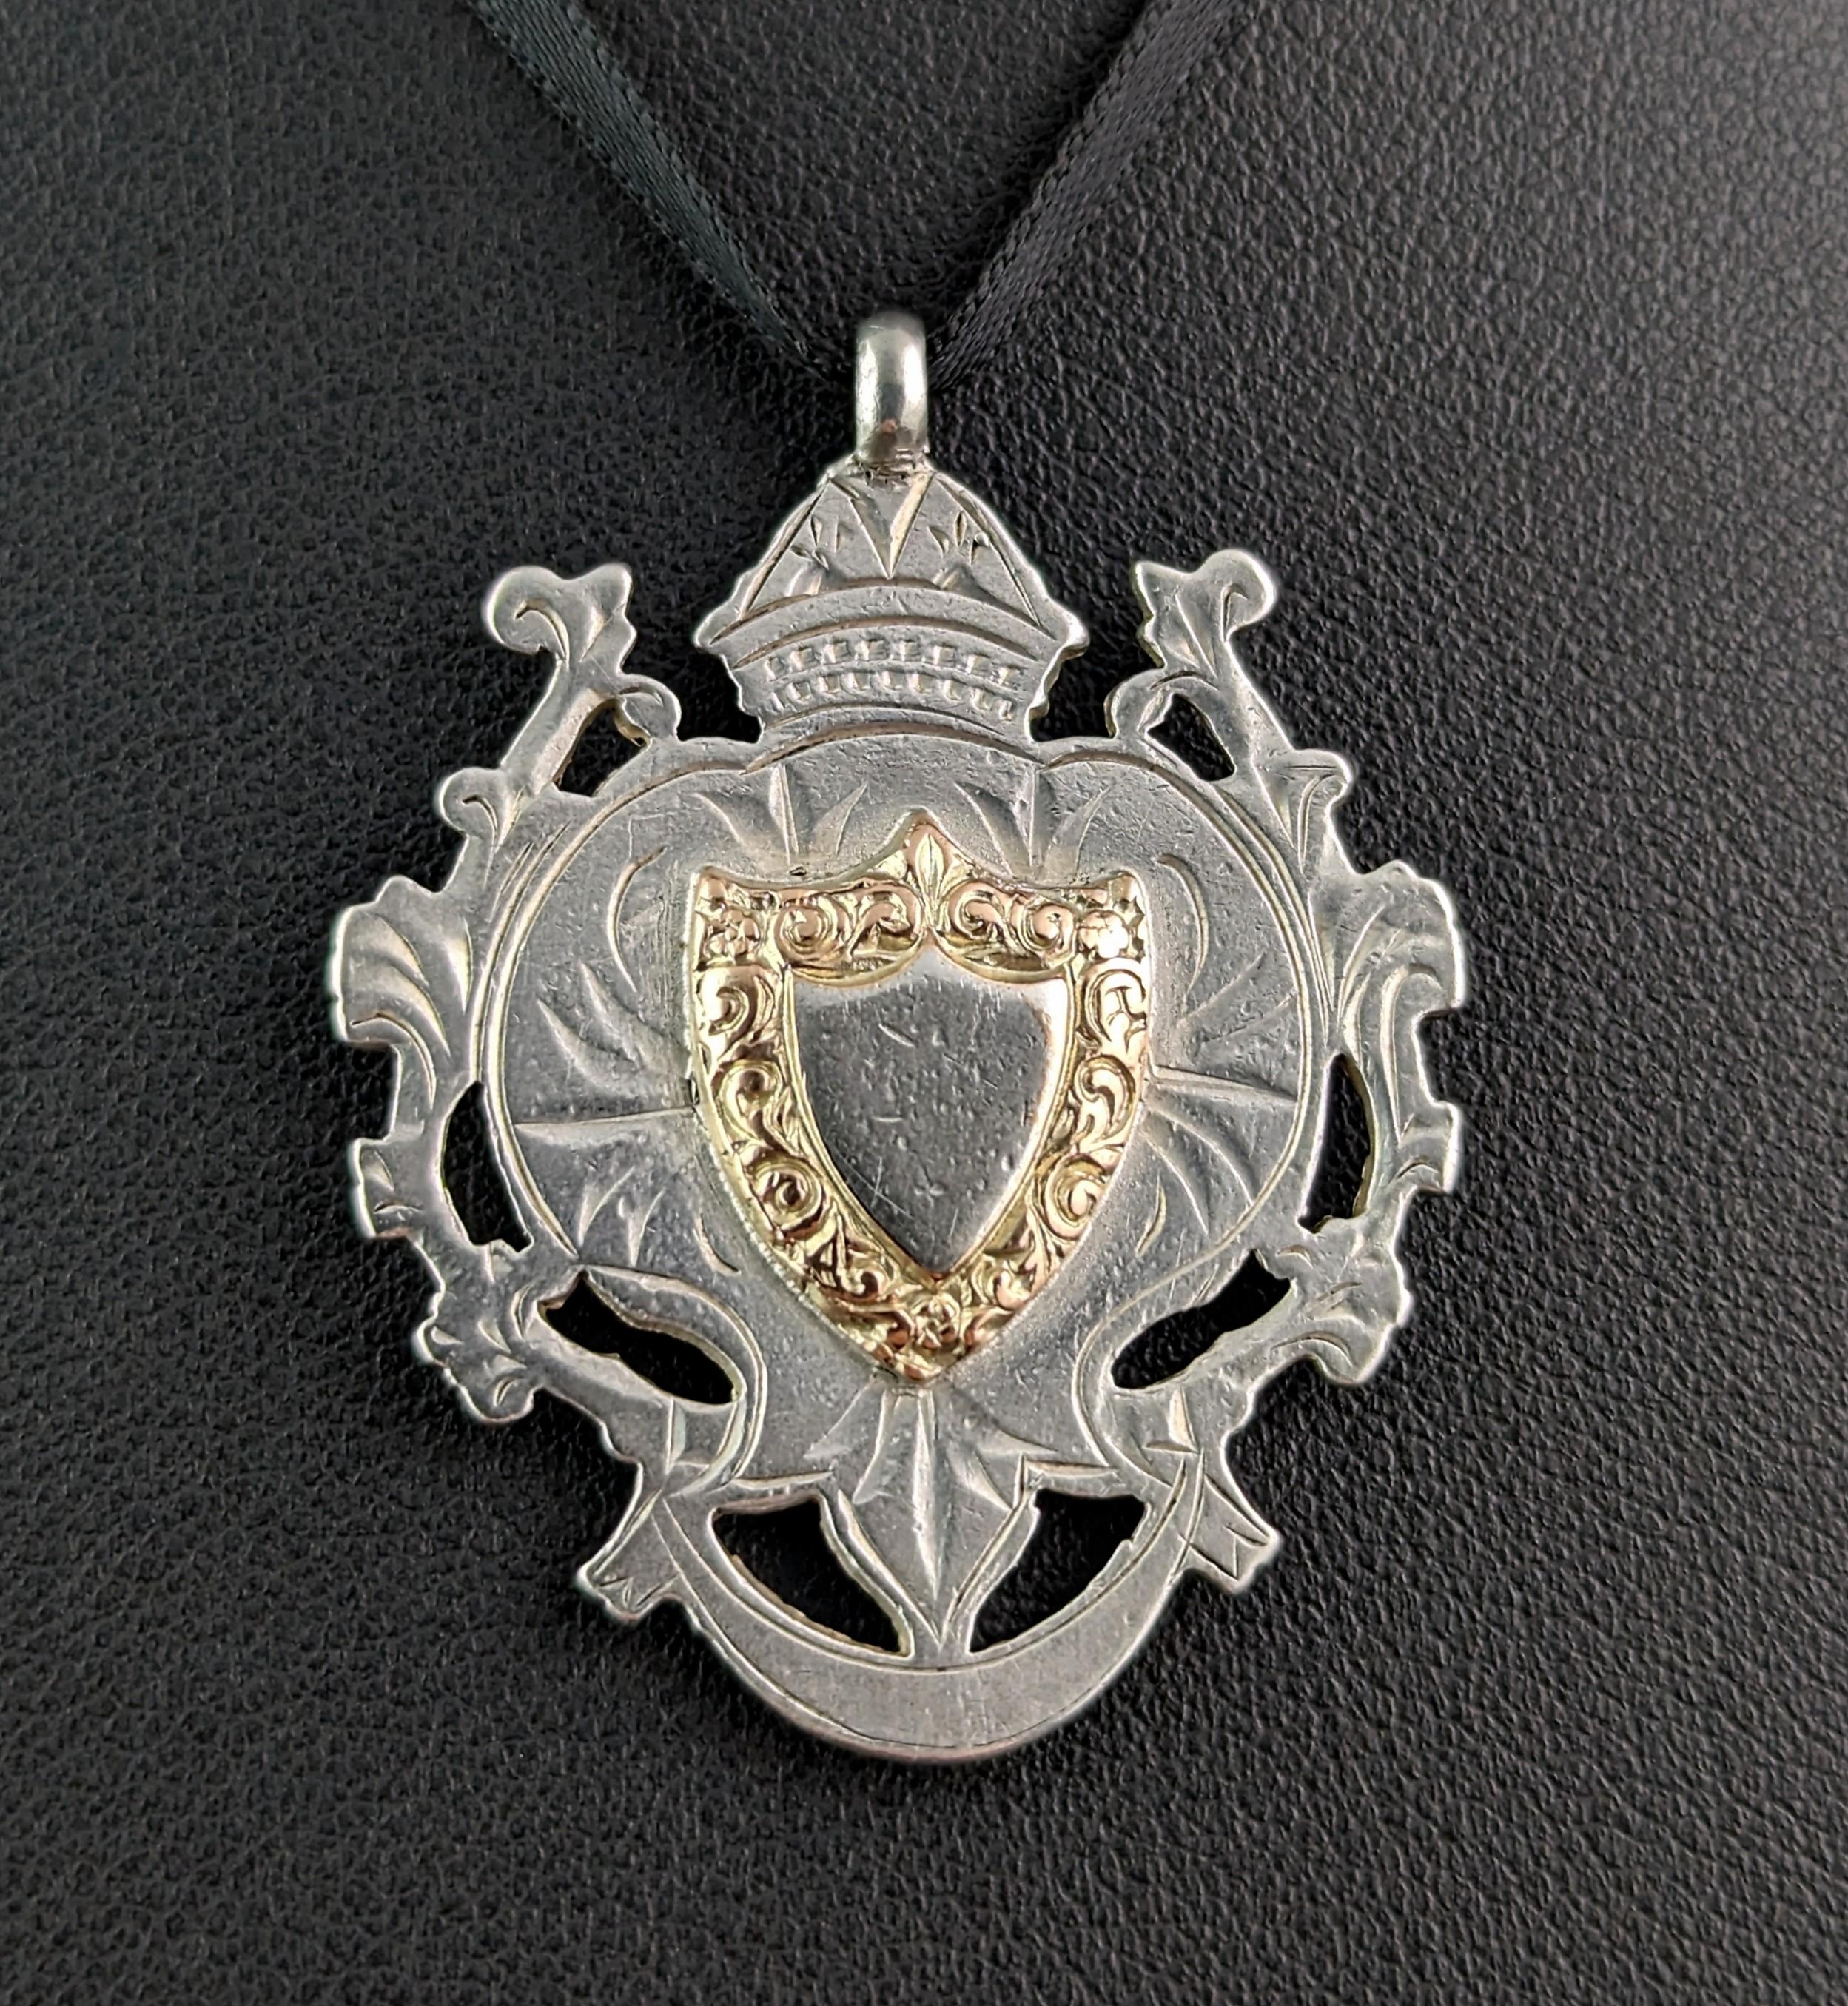 A lovely antique Edwardian era sterling silver and 9ct gold watch fob pendant.

It is an almost heart shaped piece with a scrolling border and is crowned to the top, to the centre there is a small shield shaped cartouche with a chased and engraved